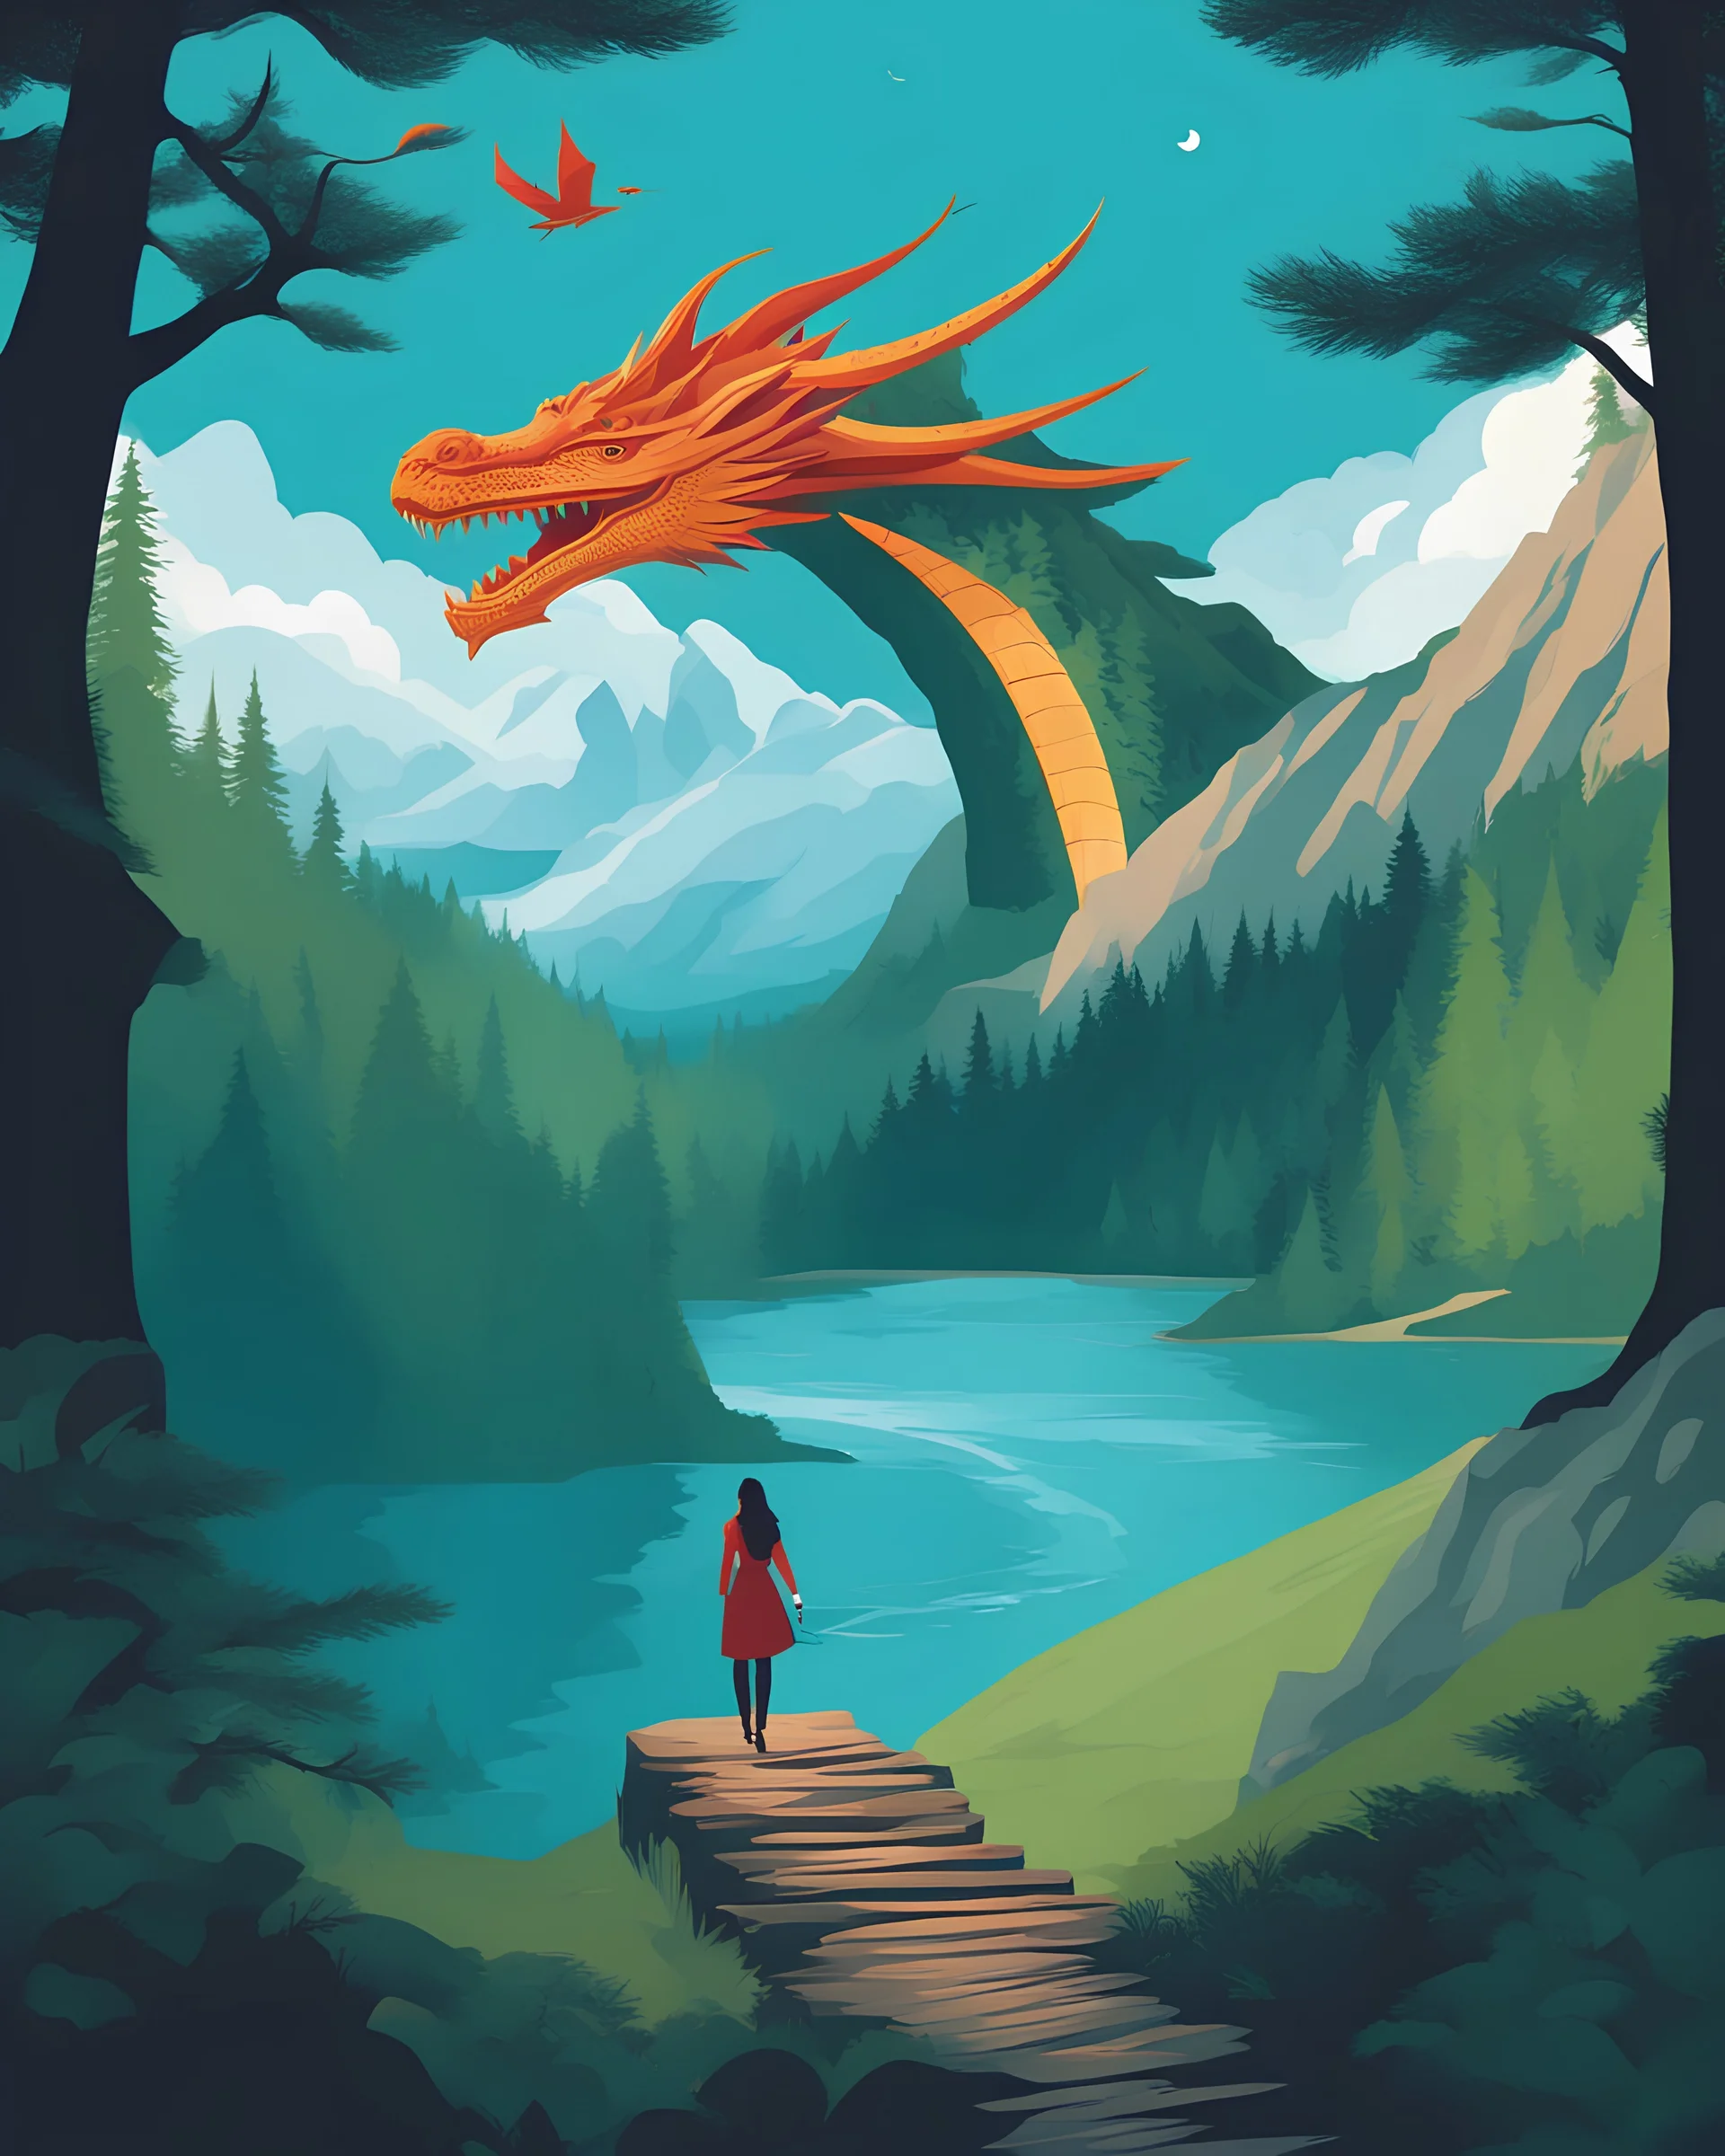 Creating a cool phone wallpaper: A stunning woman embarking on an epic adventure, A village, a lake, a forest, and a mountainous terrain, The sky adorned with a flying dragon, Vector art style, Inspired by the game Skyrim's fantasy world.